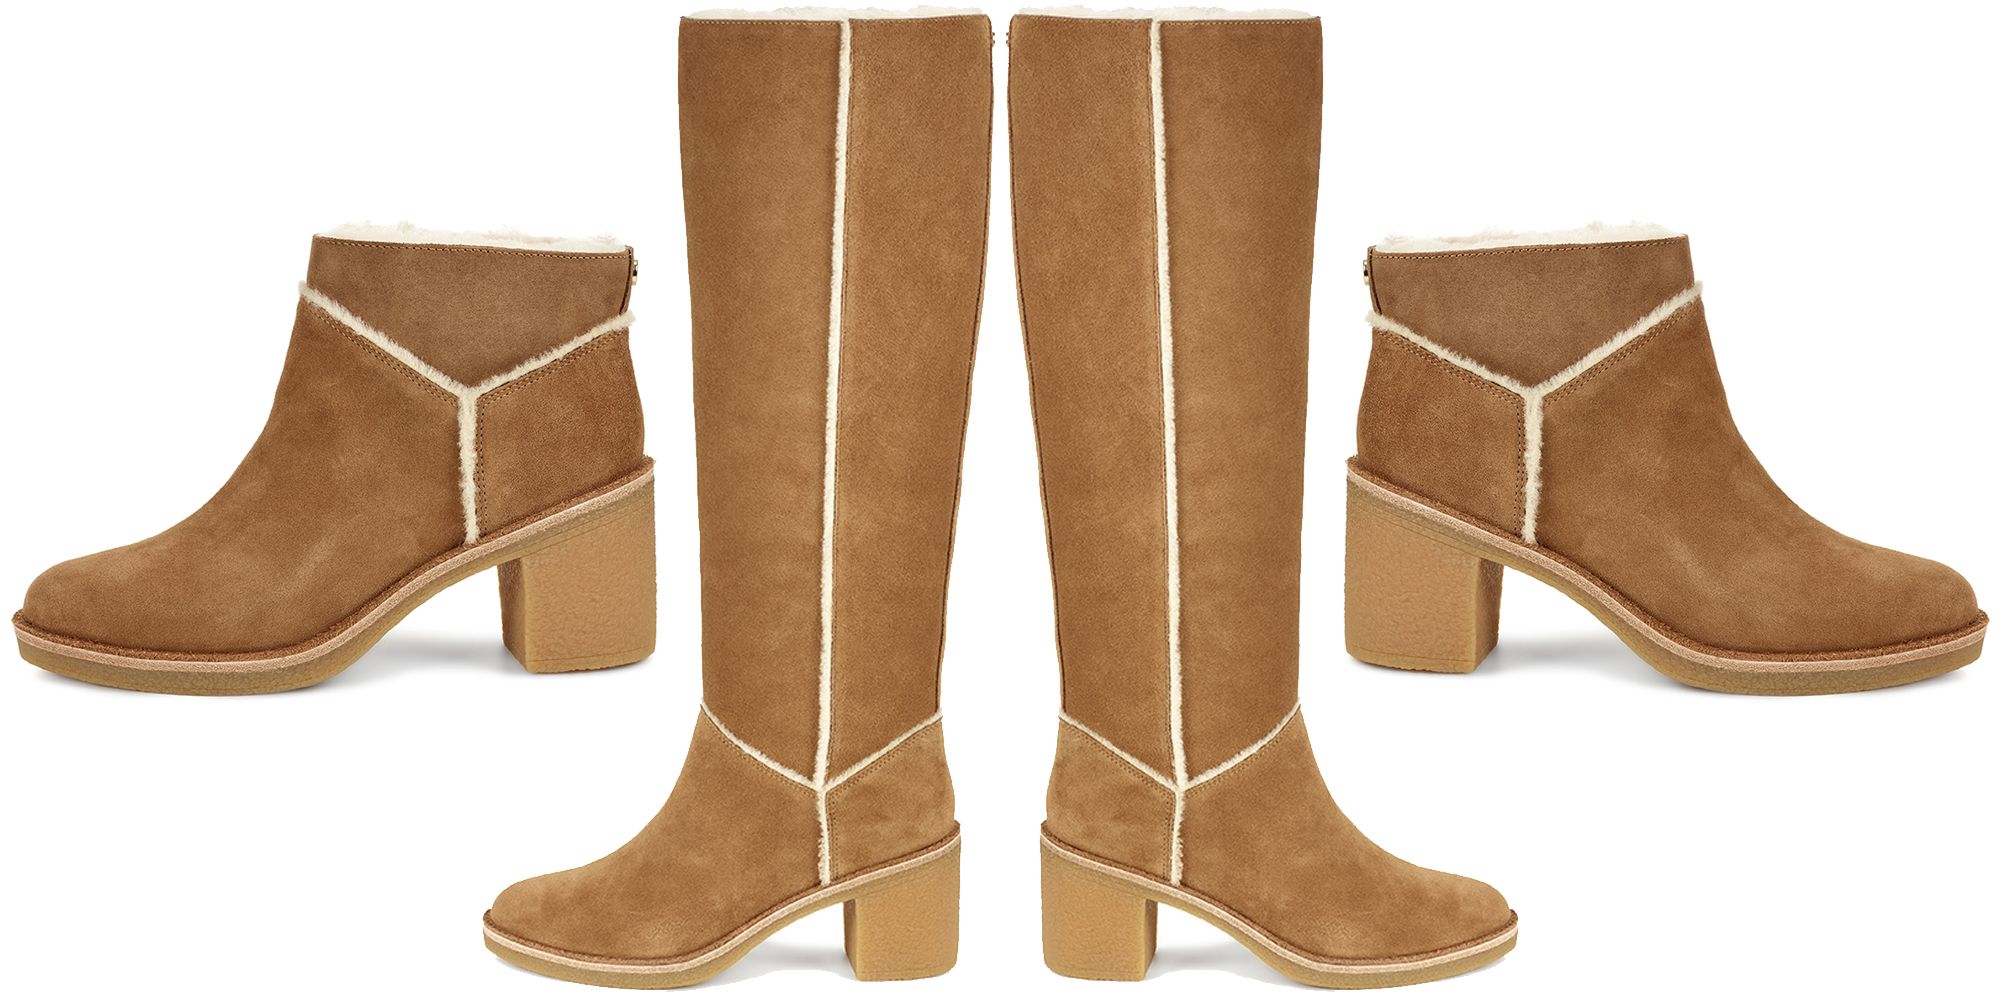 Heeled Ugg Boots - New Ugg Boots for 